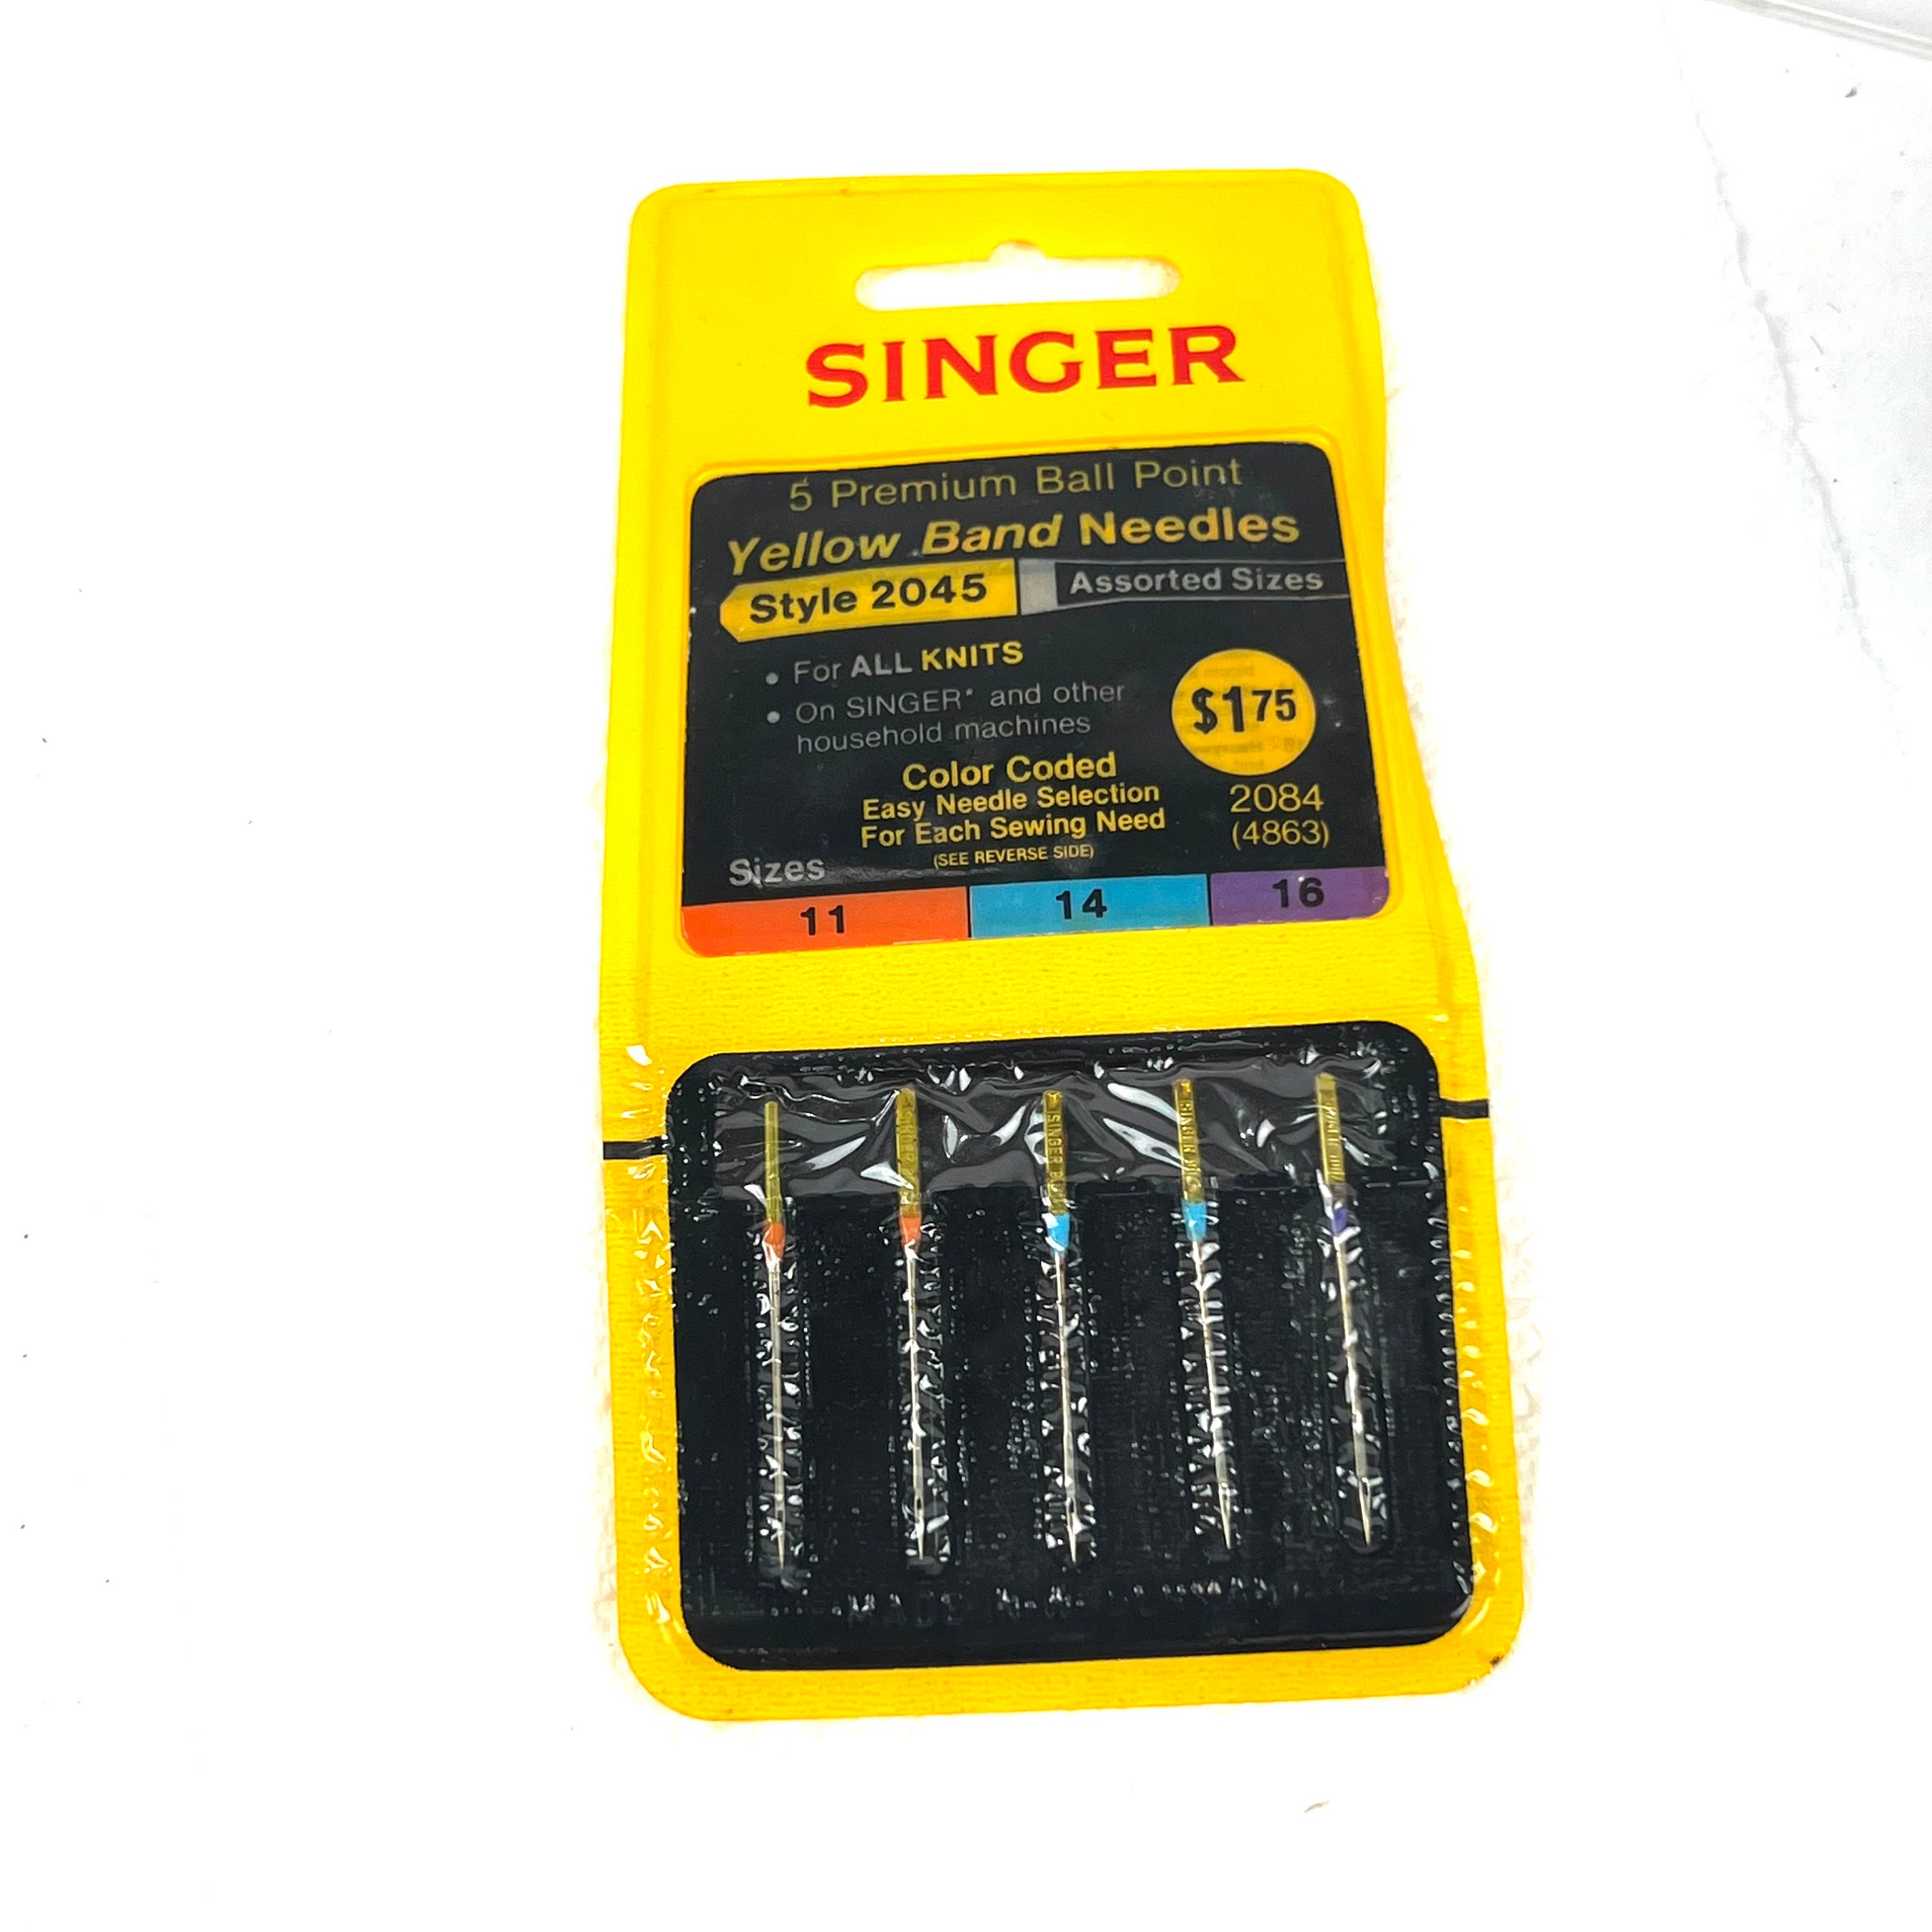 SINGER 4863 Universal Ball Point Machine Needles, Assorted Sizes, 5-Count